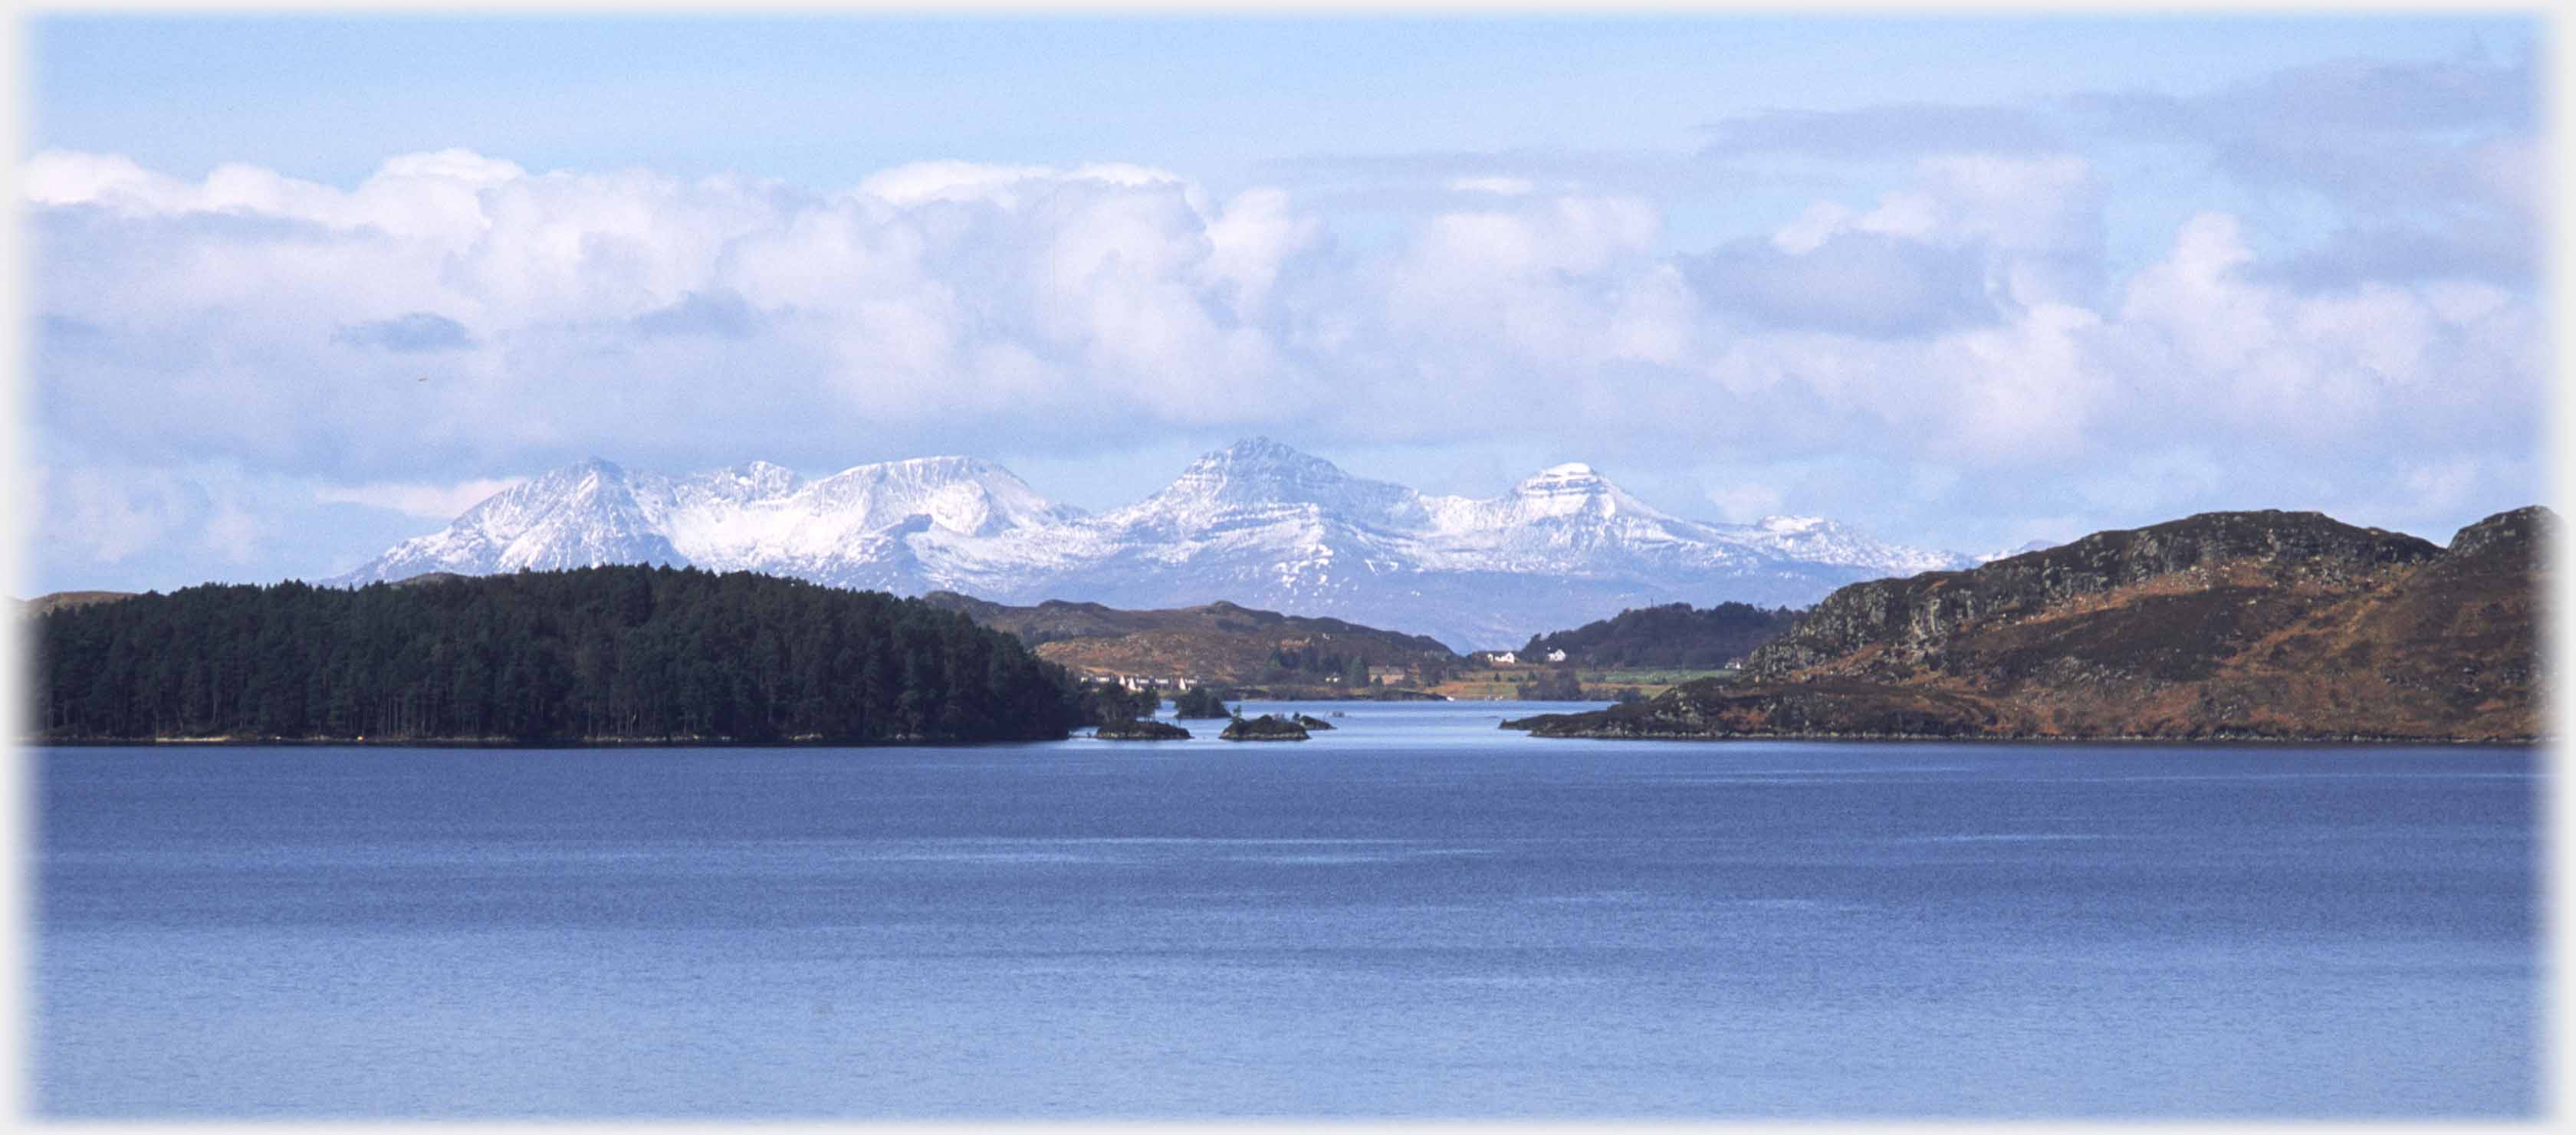 Snow covered hills behind lower nearer hills at head of loch.